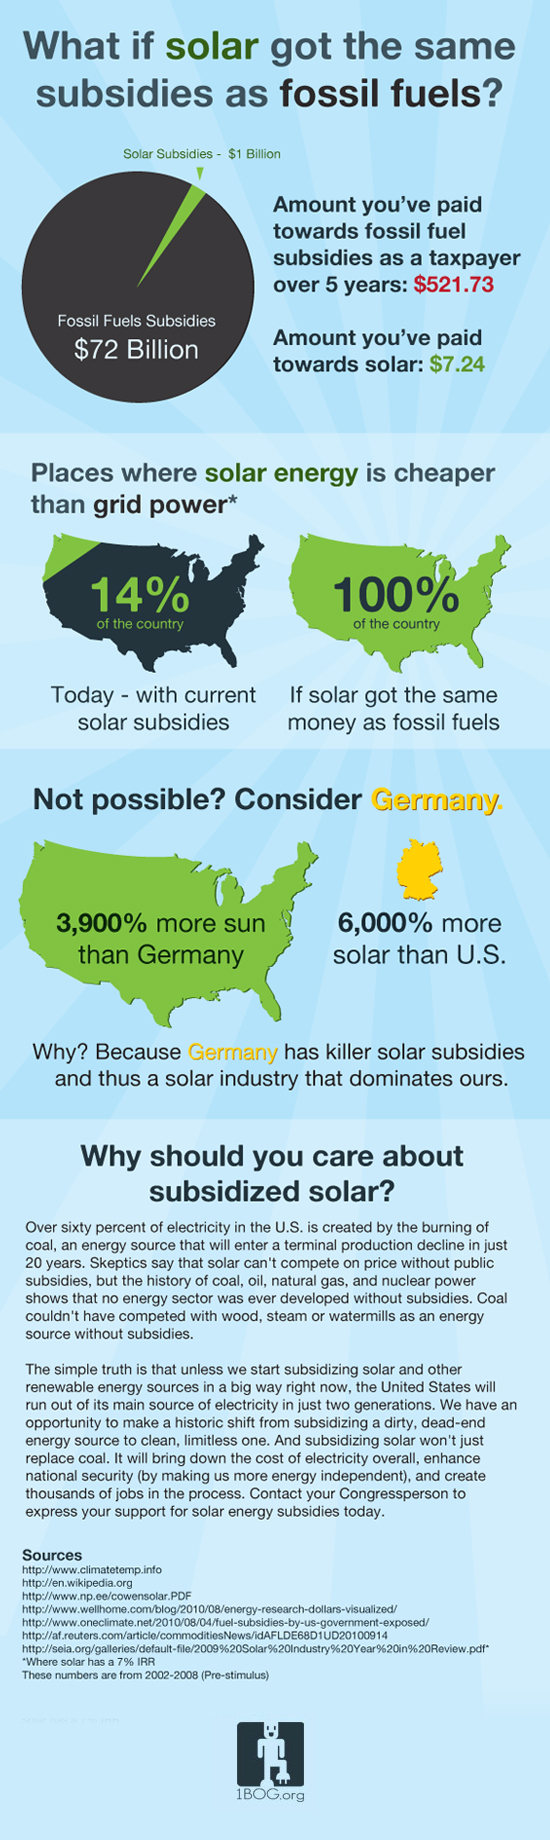 what_if_solar_was_subsidized_like_fossil_fuels_sm.jpg